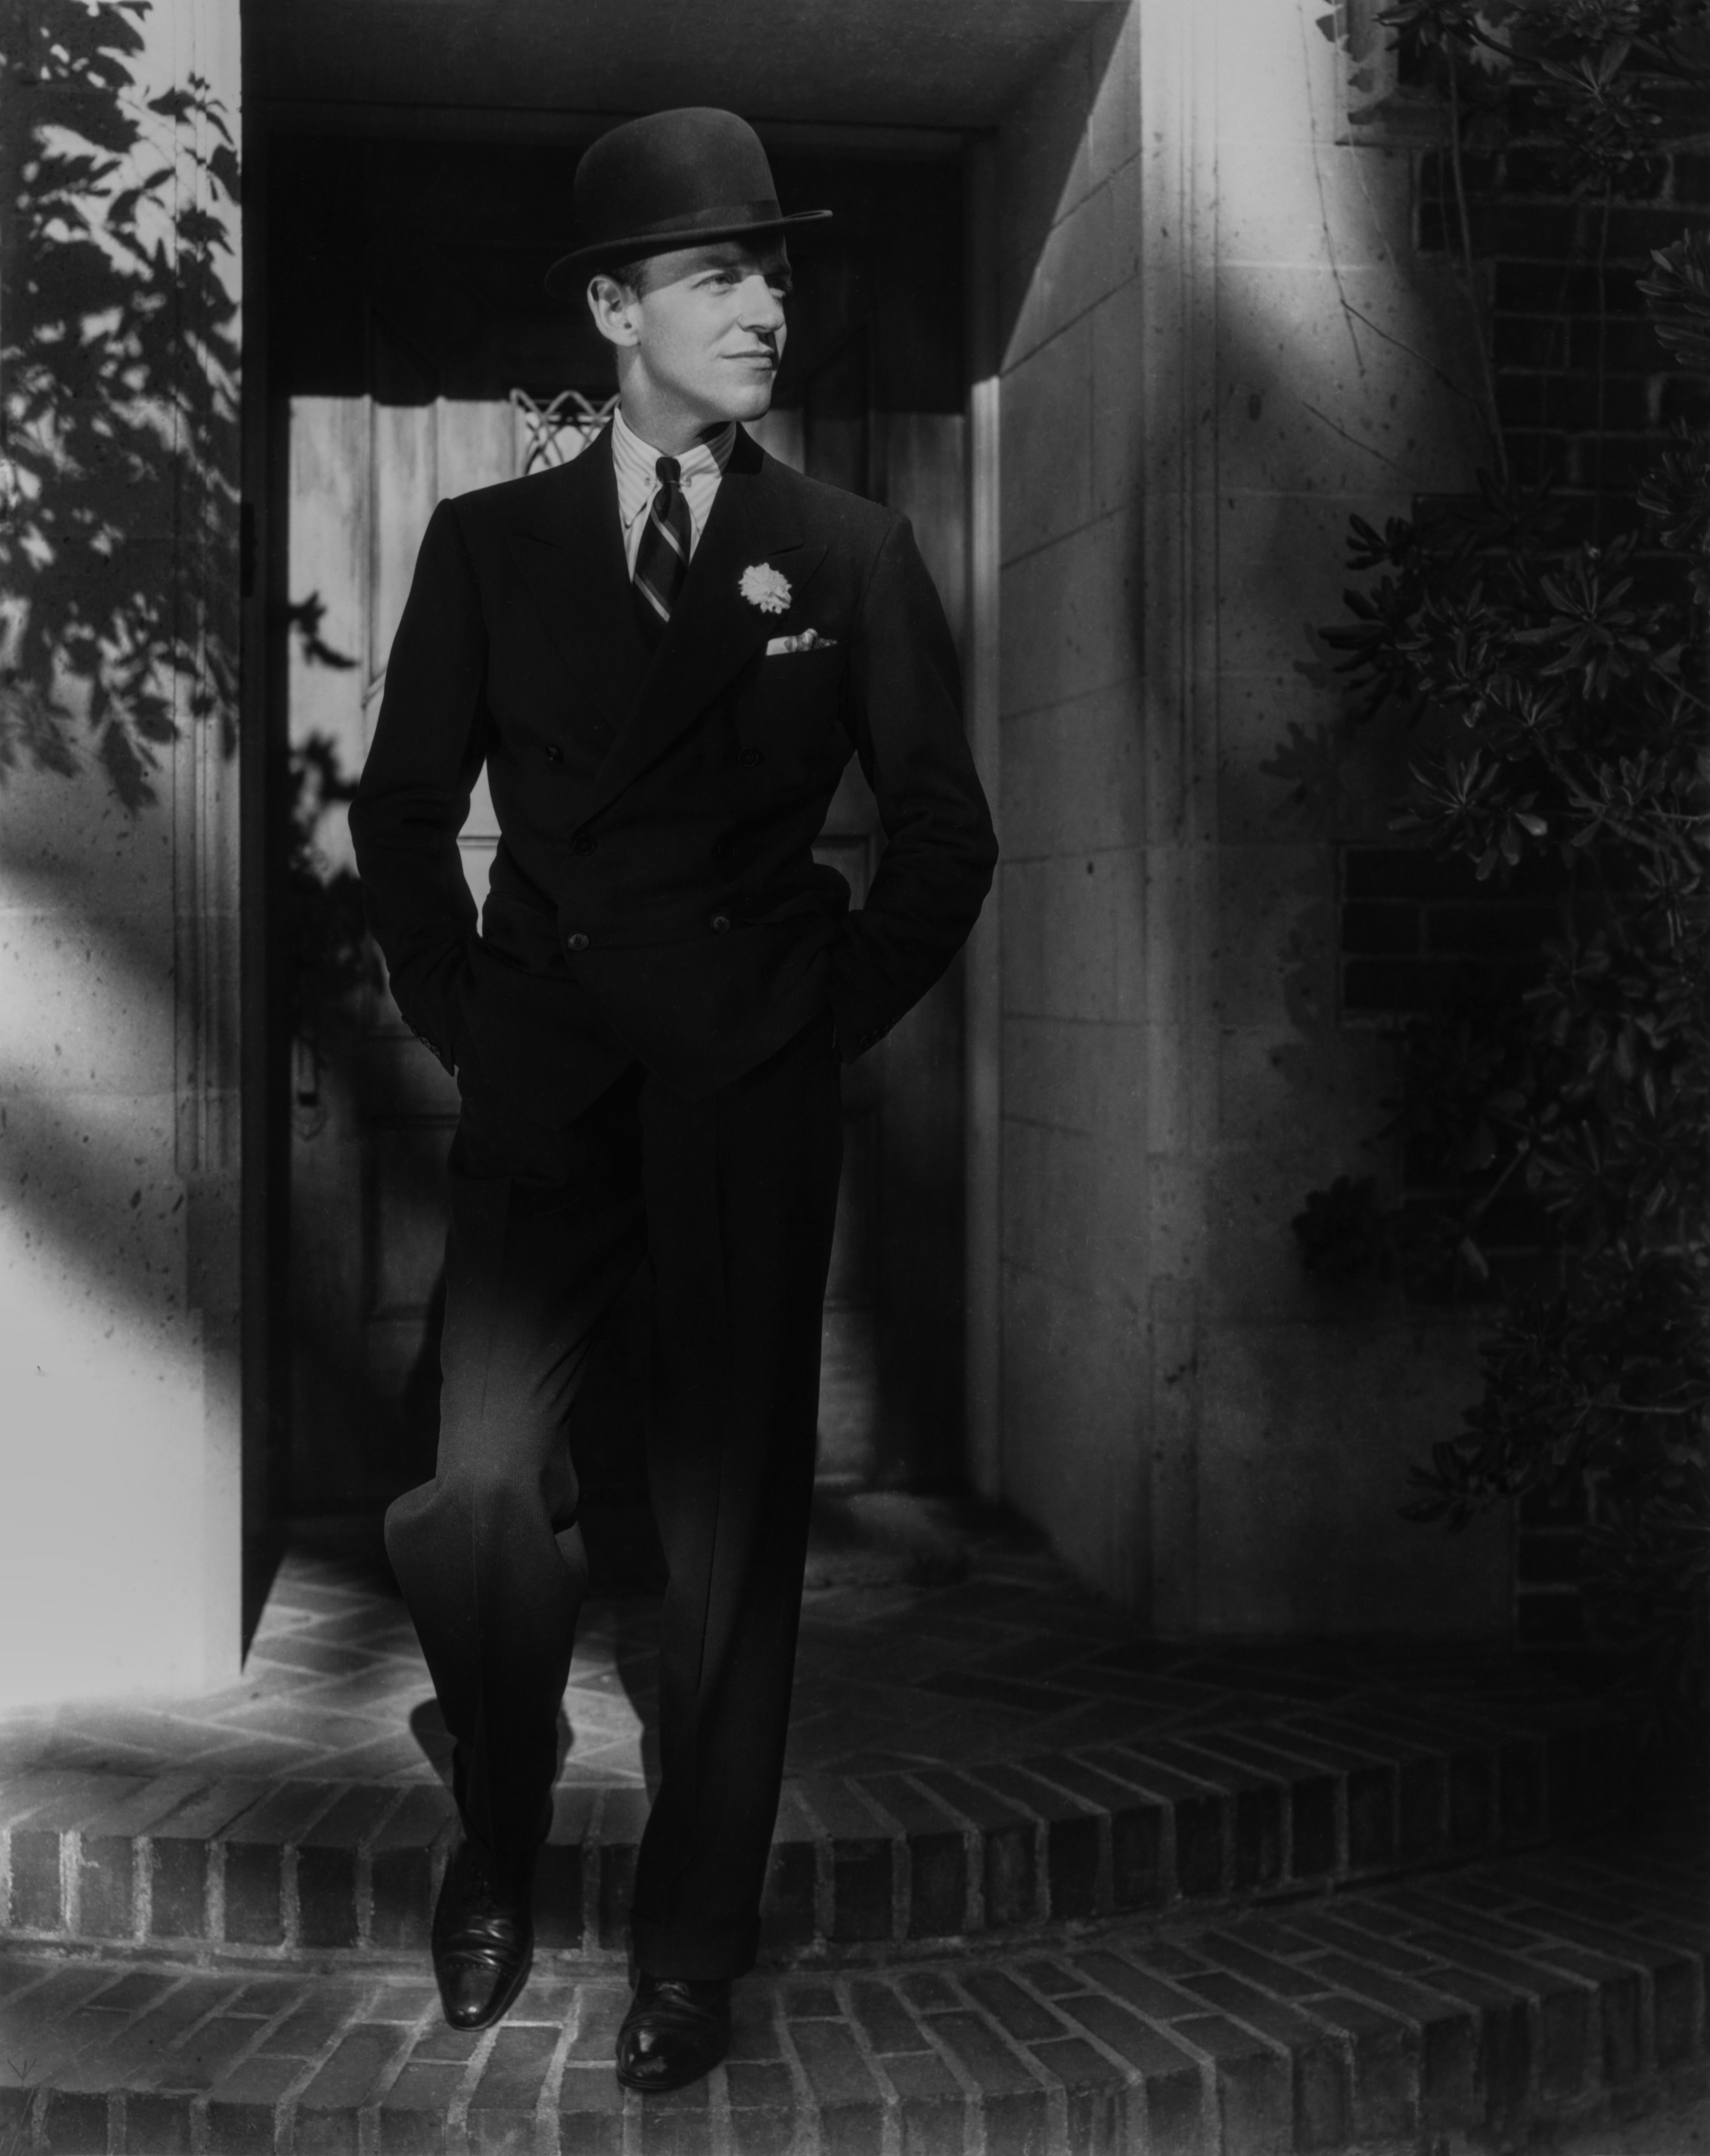 Unknown Portrait Photograph – Fred Astaire Posed in Doorway II Movie Star News Fine Art Print